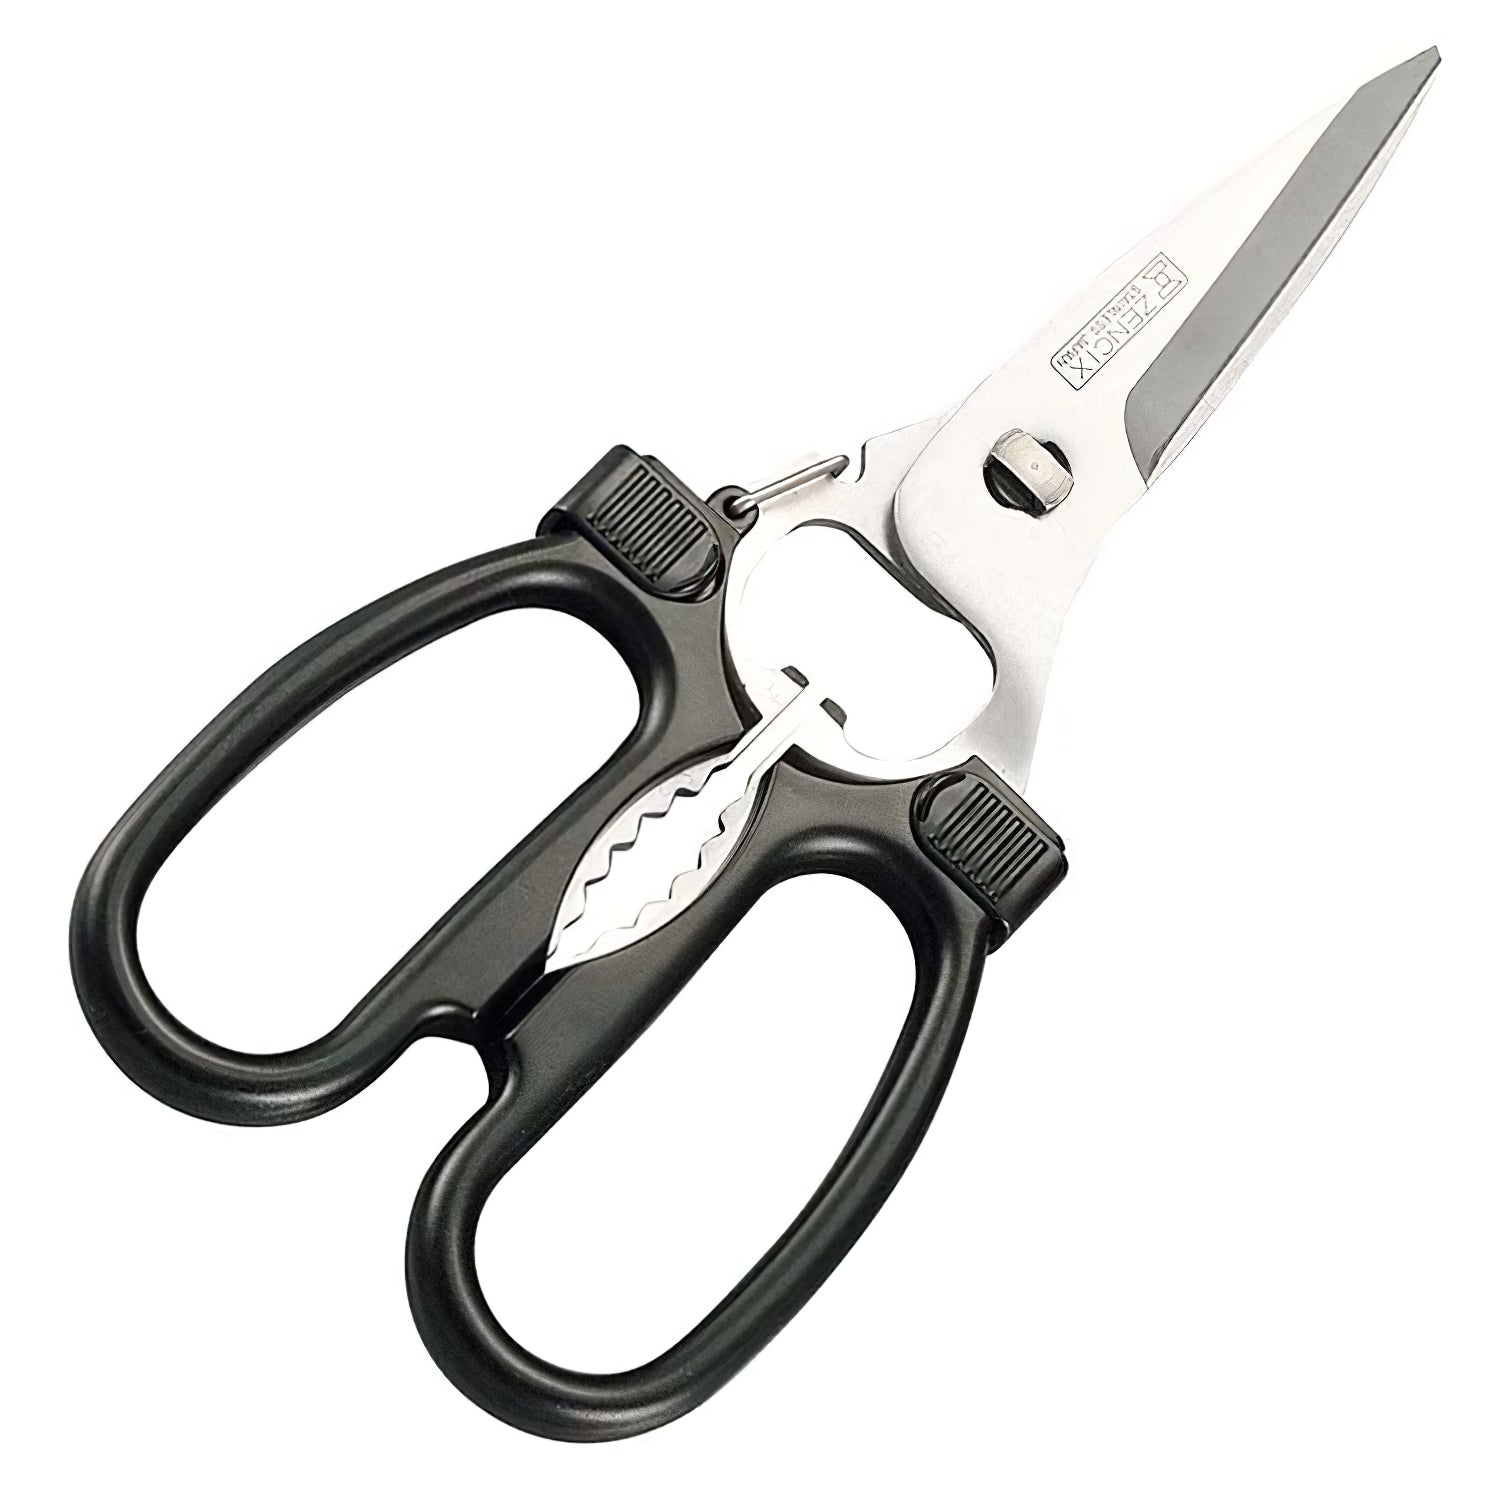  CANARY Extra Nonstick Office Scissors 6.3, Made in JAPAN,  Japanese Non Stick Desk Scissors [BOND FREE], Grey : Toys & Games